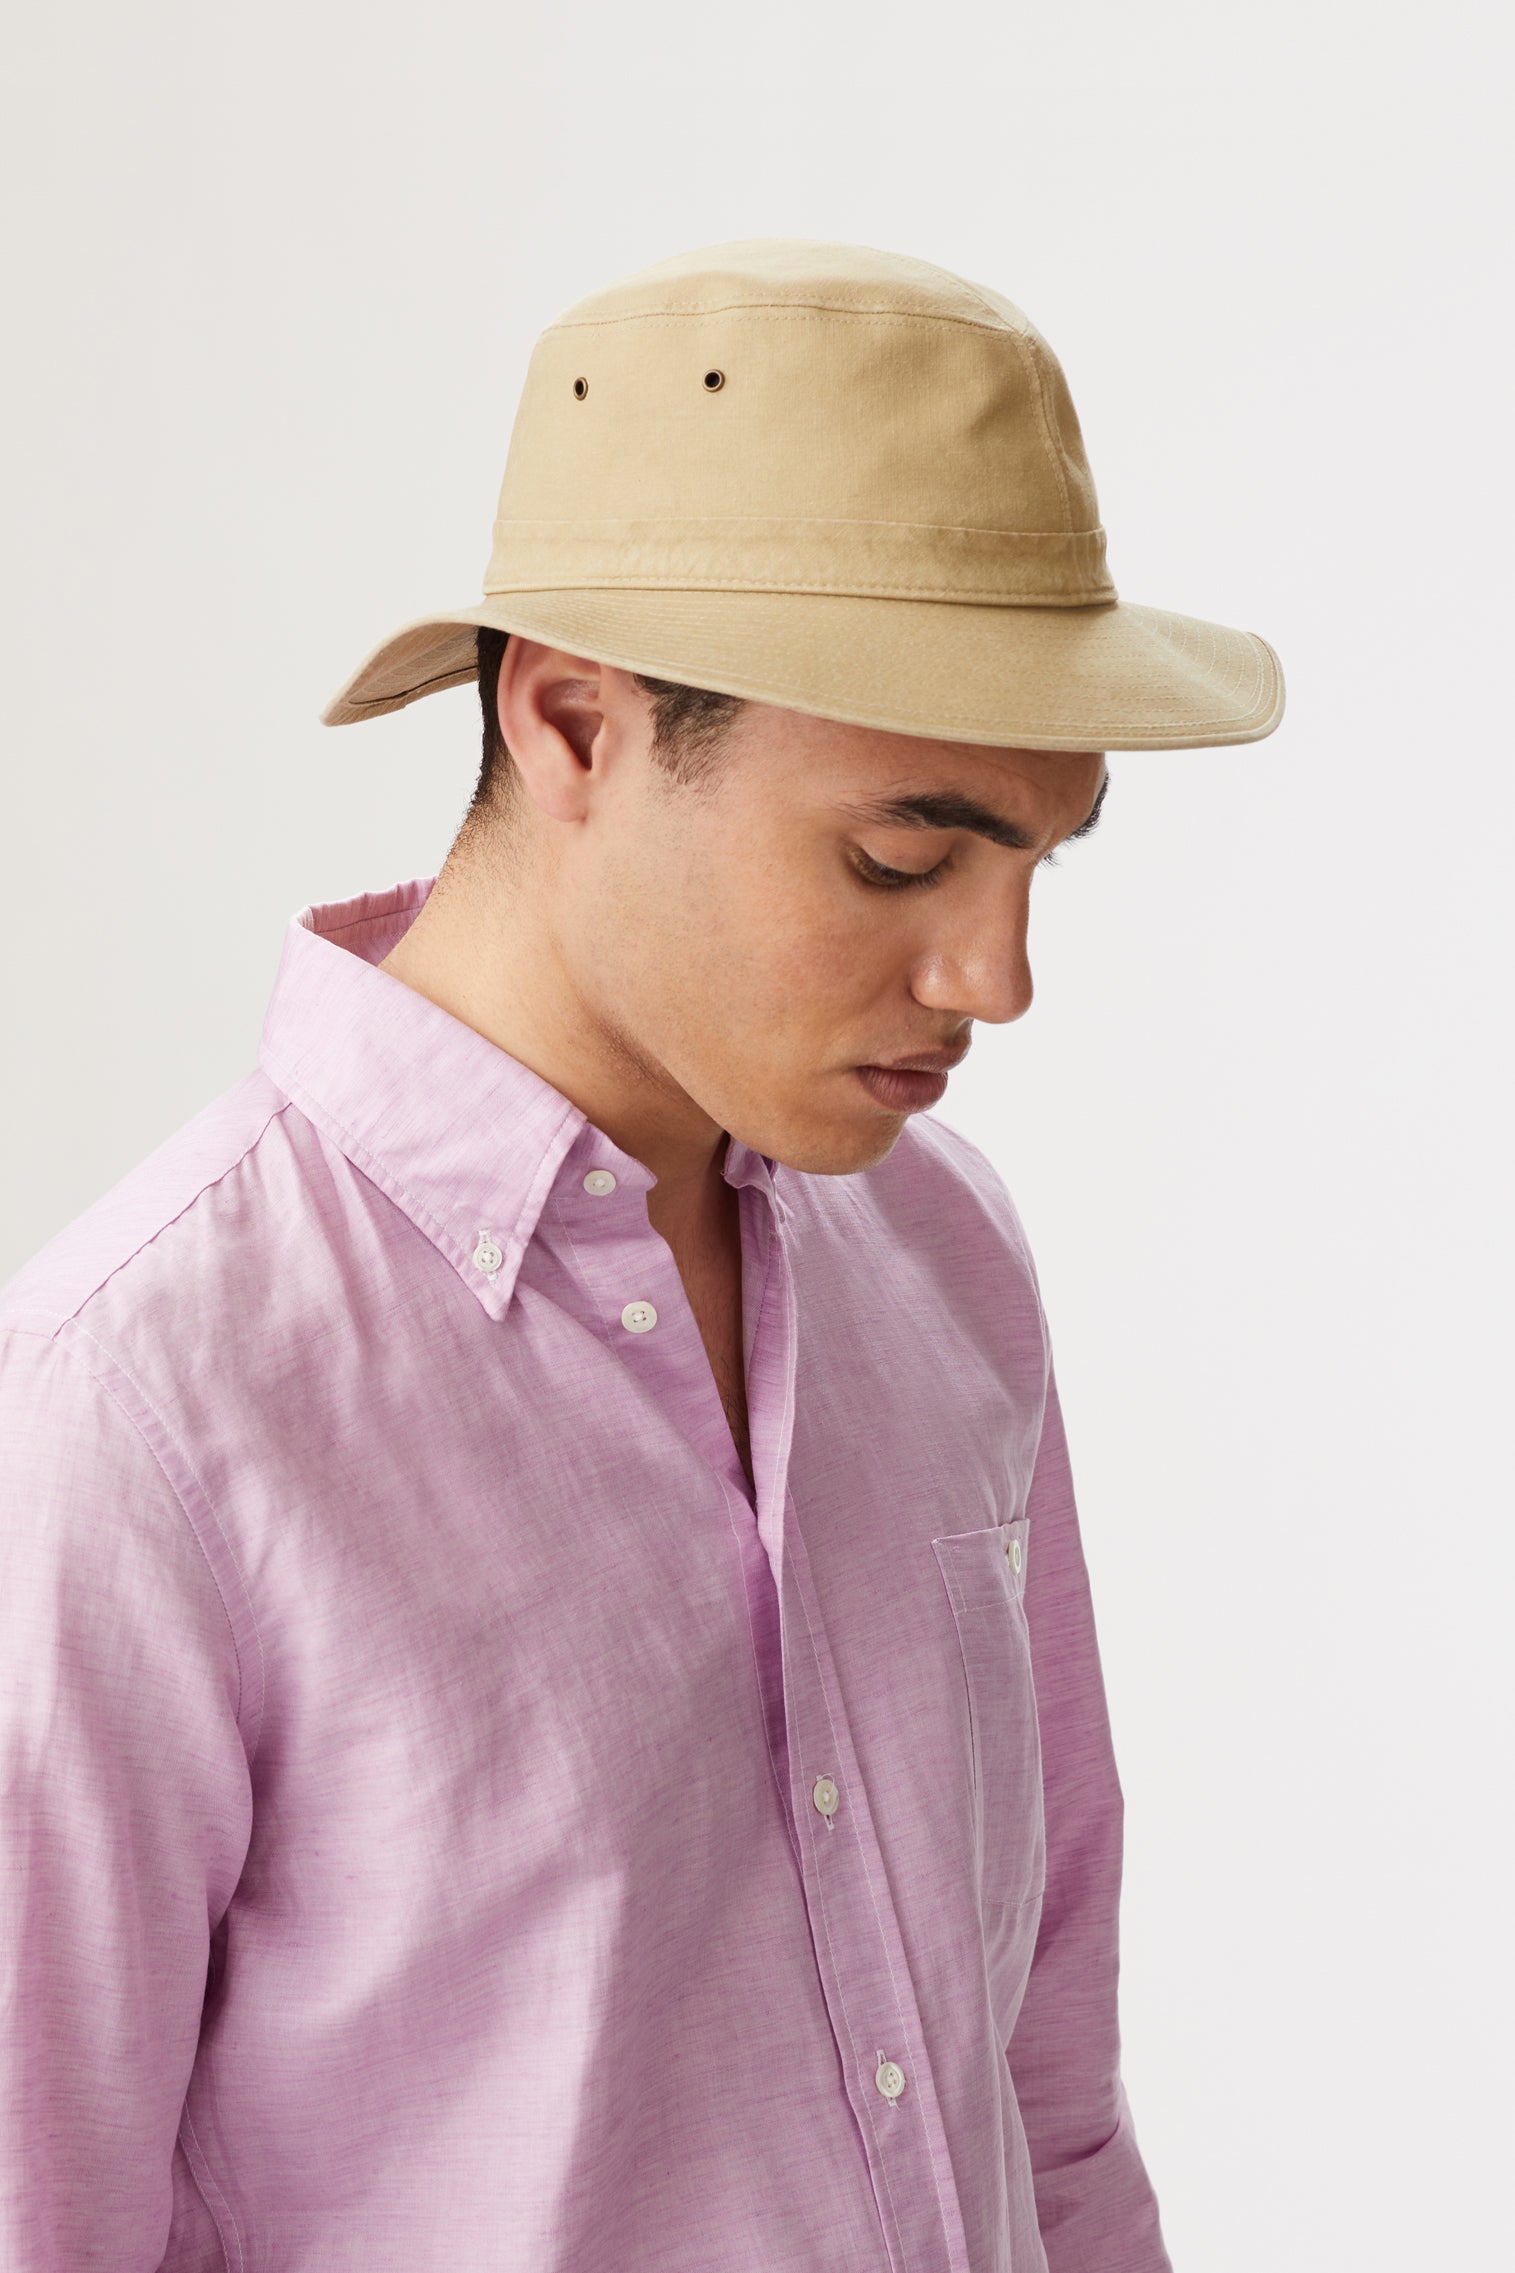 Capri Rollable Hat - Products - Lock & Co. Hatters London UK